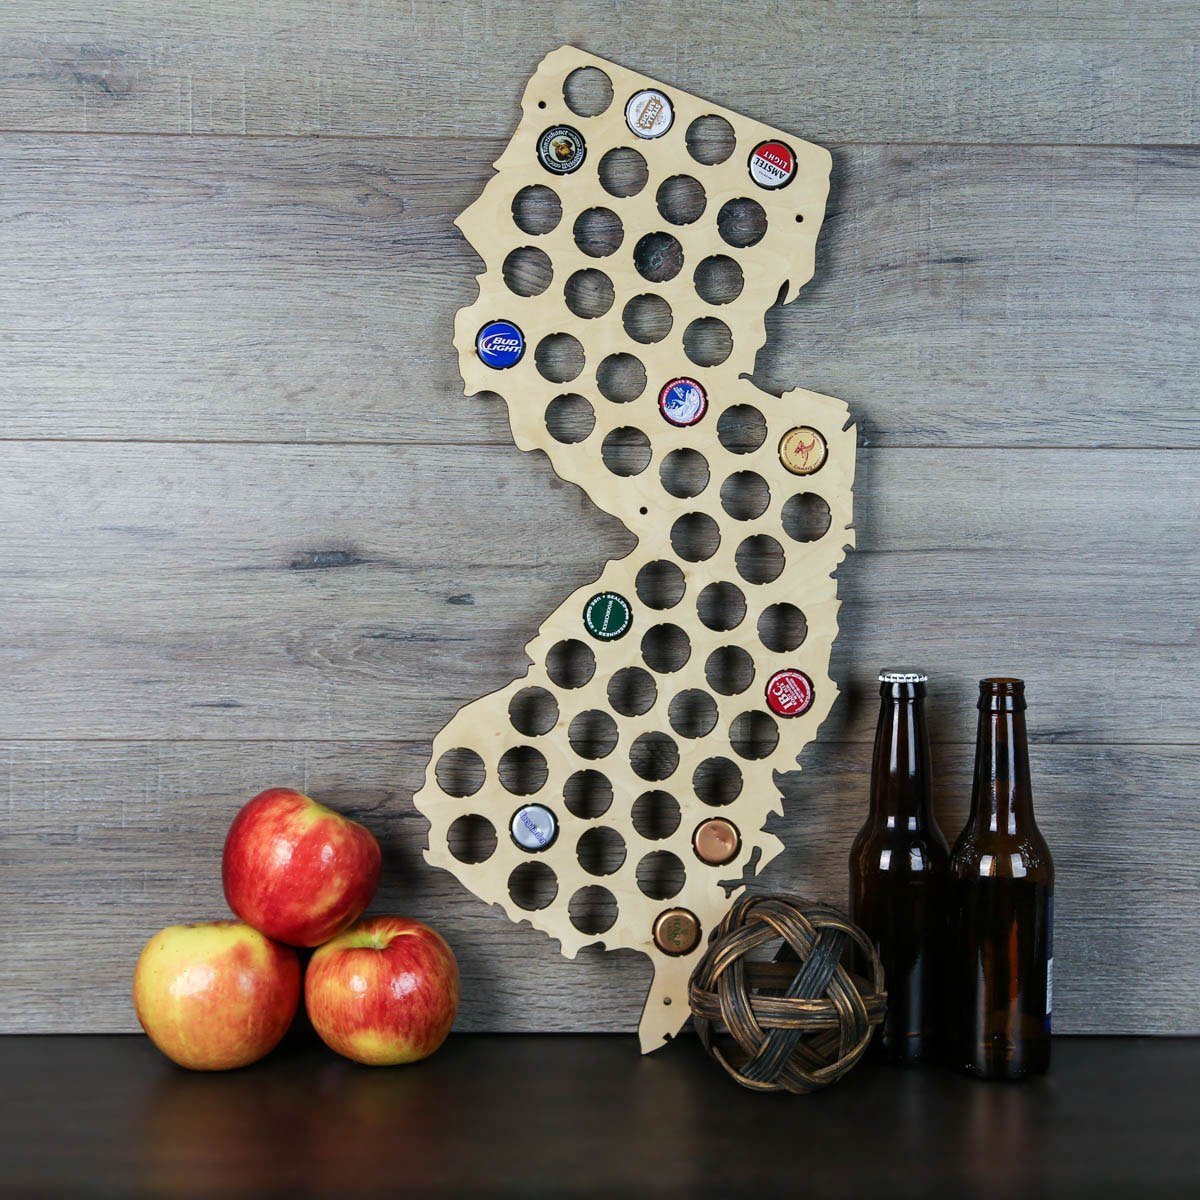 Torched Products Beer Bottle Cap Holder New Jersey Beer Cap Map (777571303541)